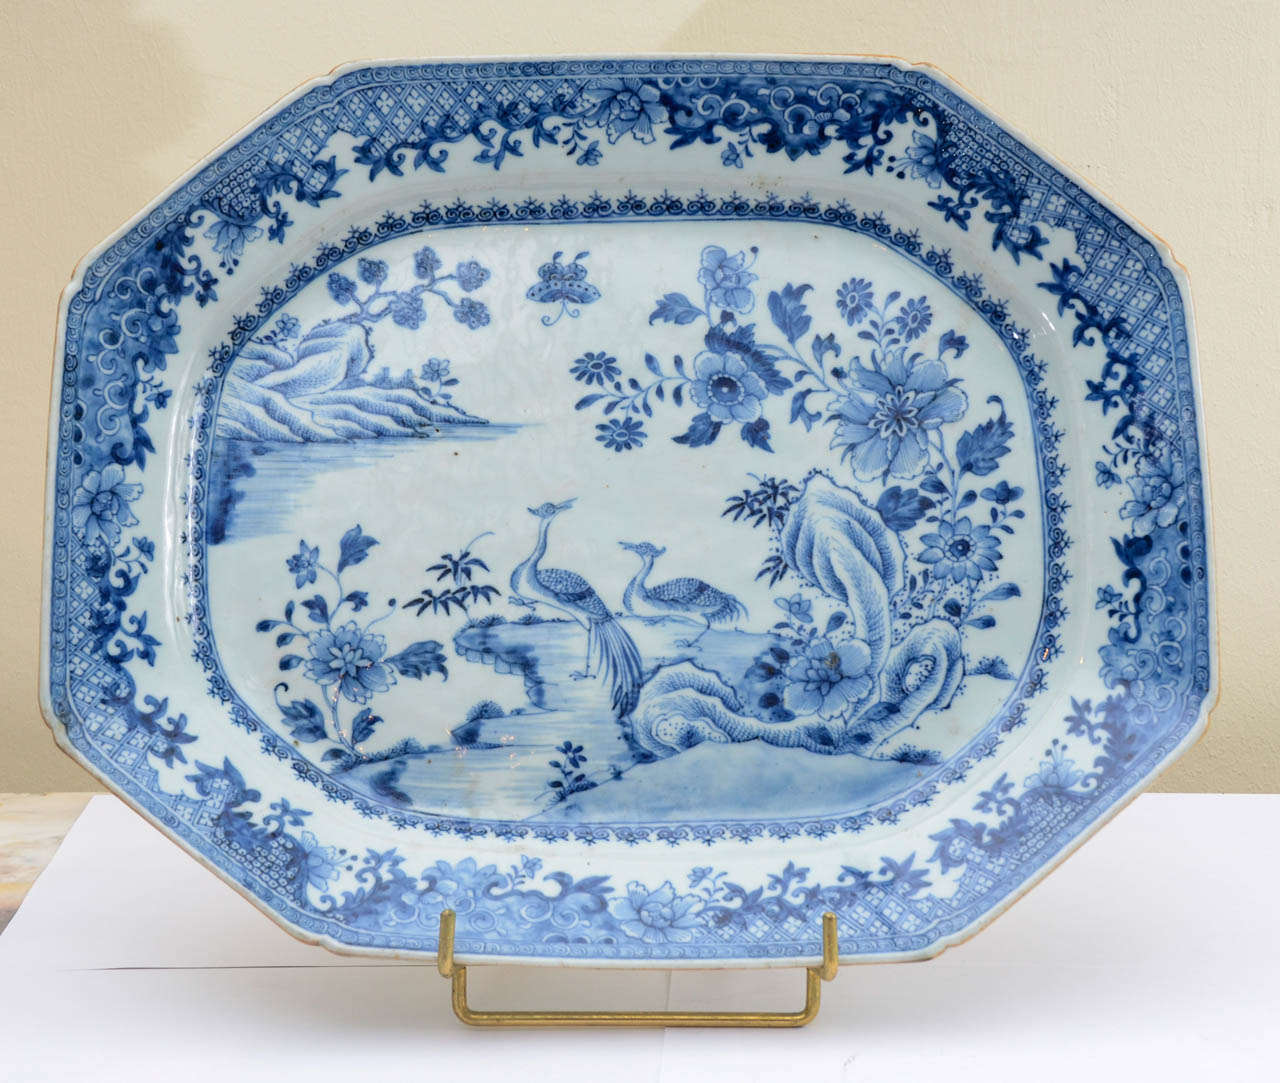 Octogonal porcelain plate, underglazed blue cobalt decor of a peacocks couple on a river bank, and a landscape wooded with blossoming peony trees and longevity pine trees.